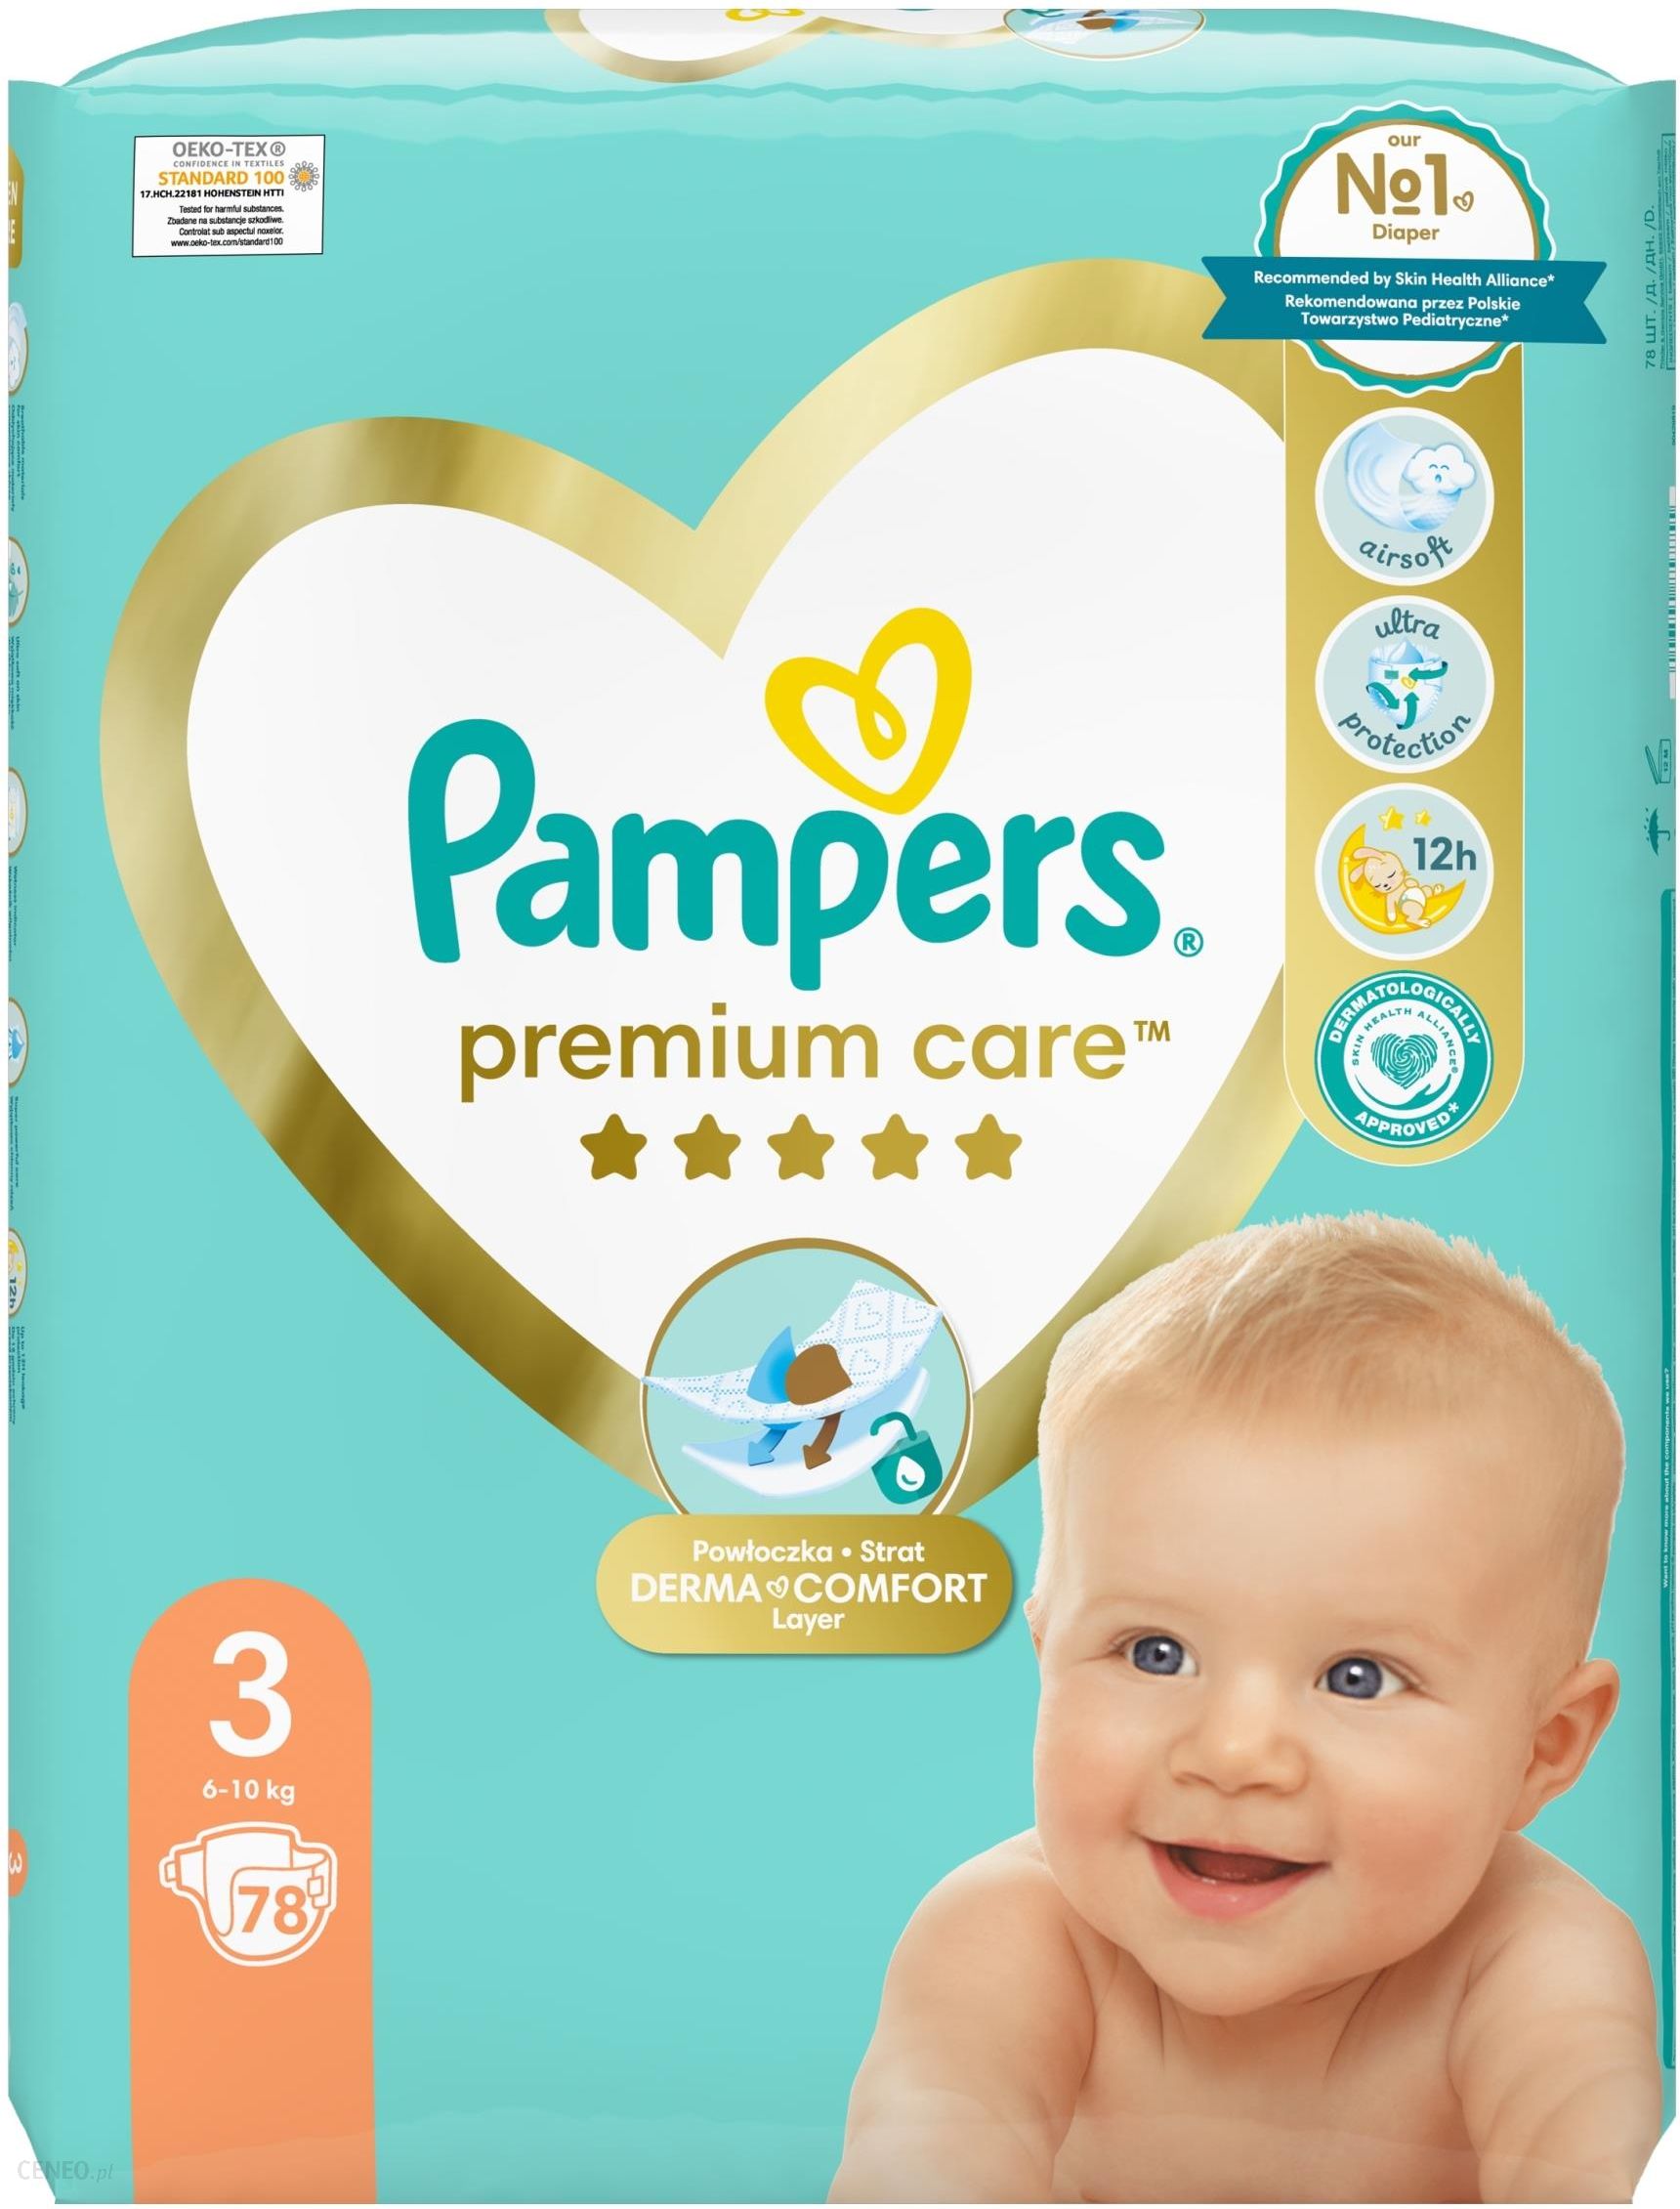 pampers 3 74 szt ceneo